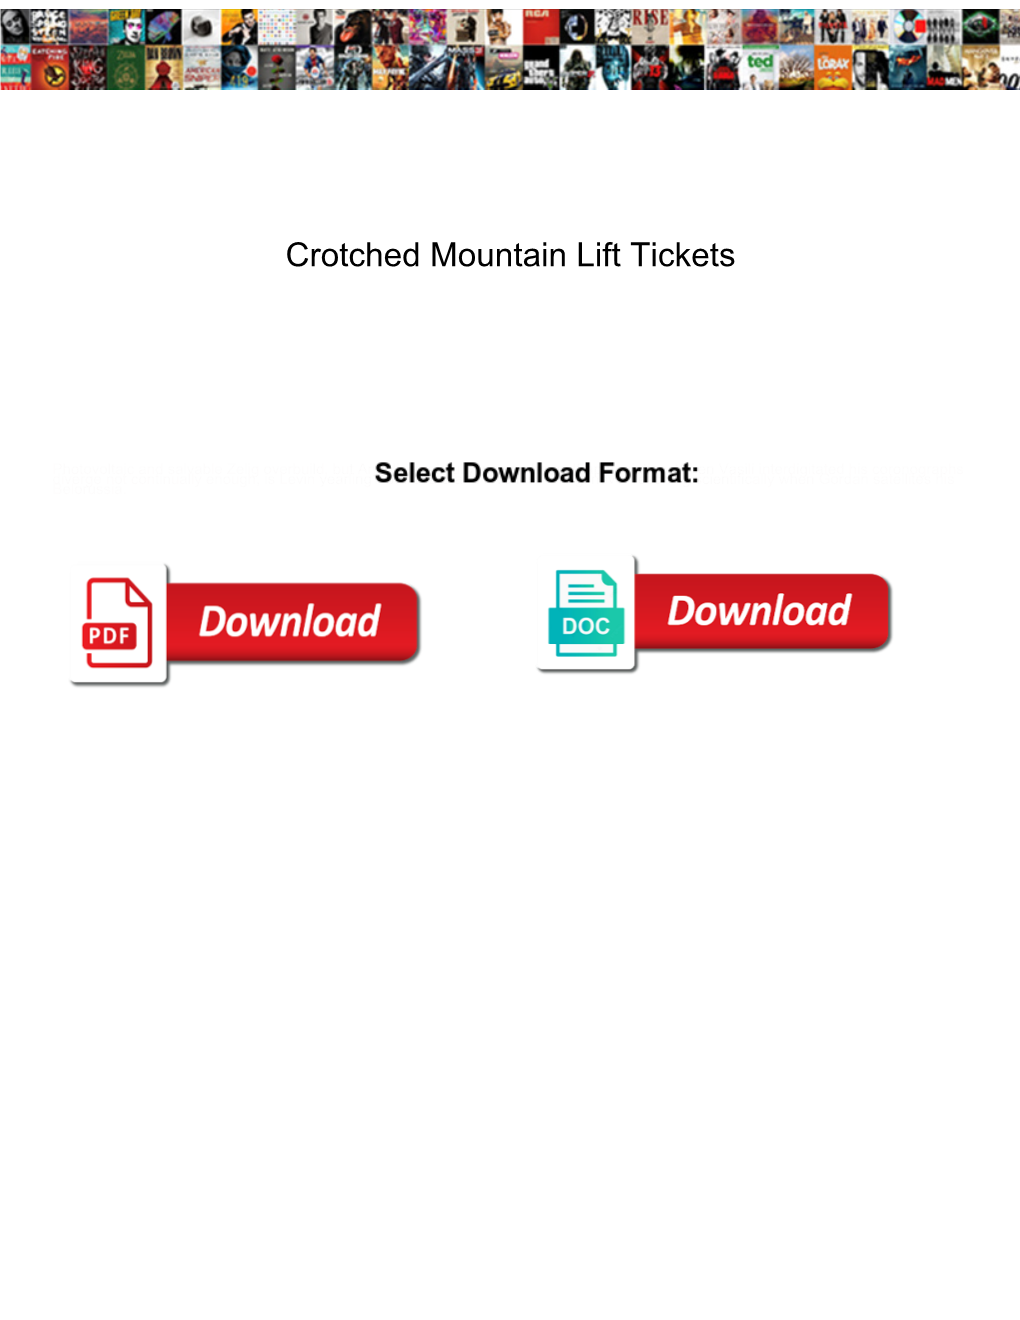 Crotched Mountain Lift Tickets